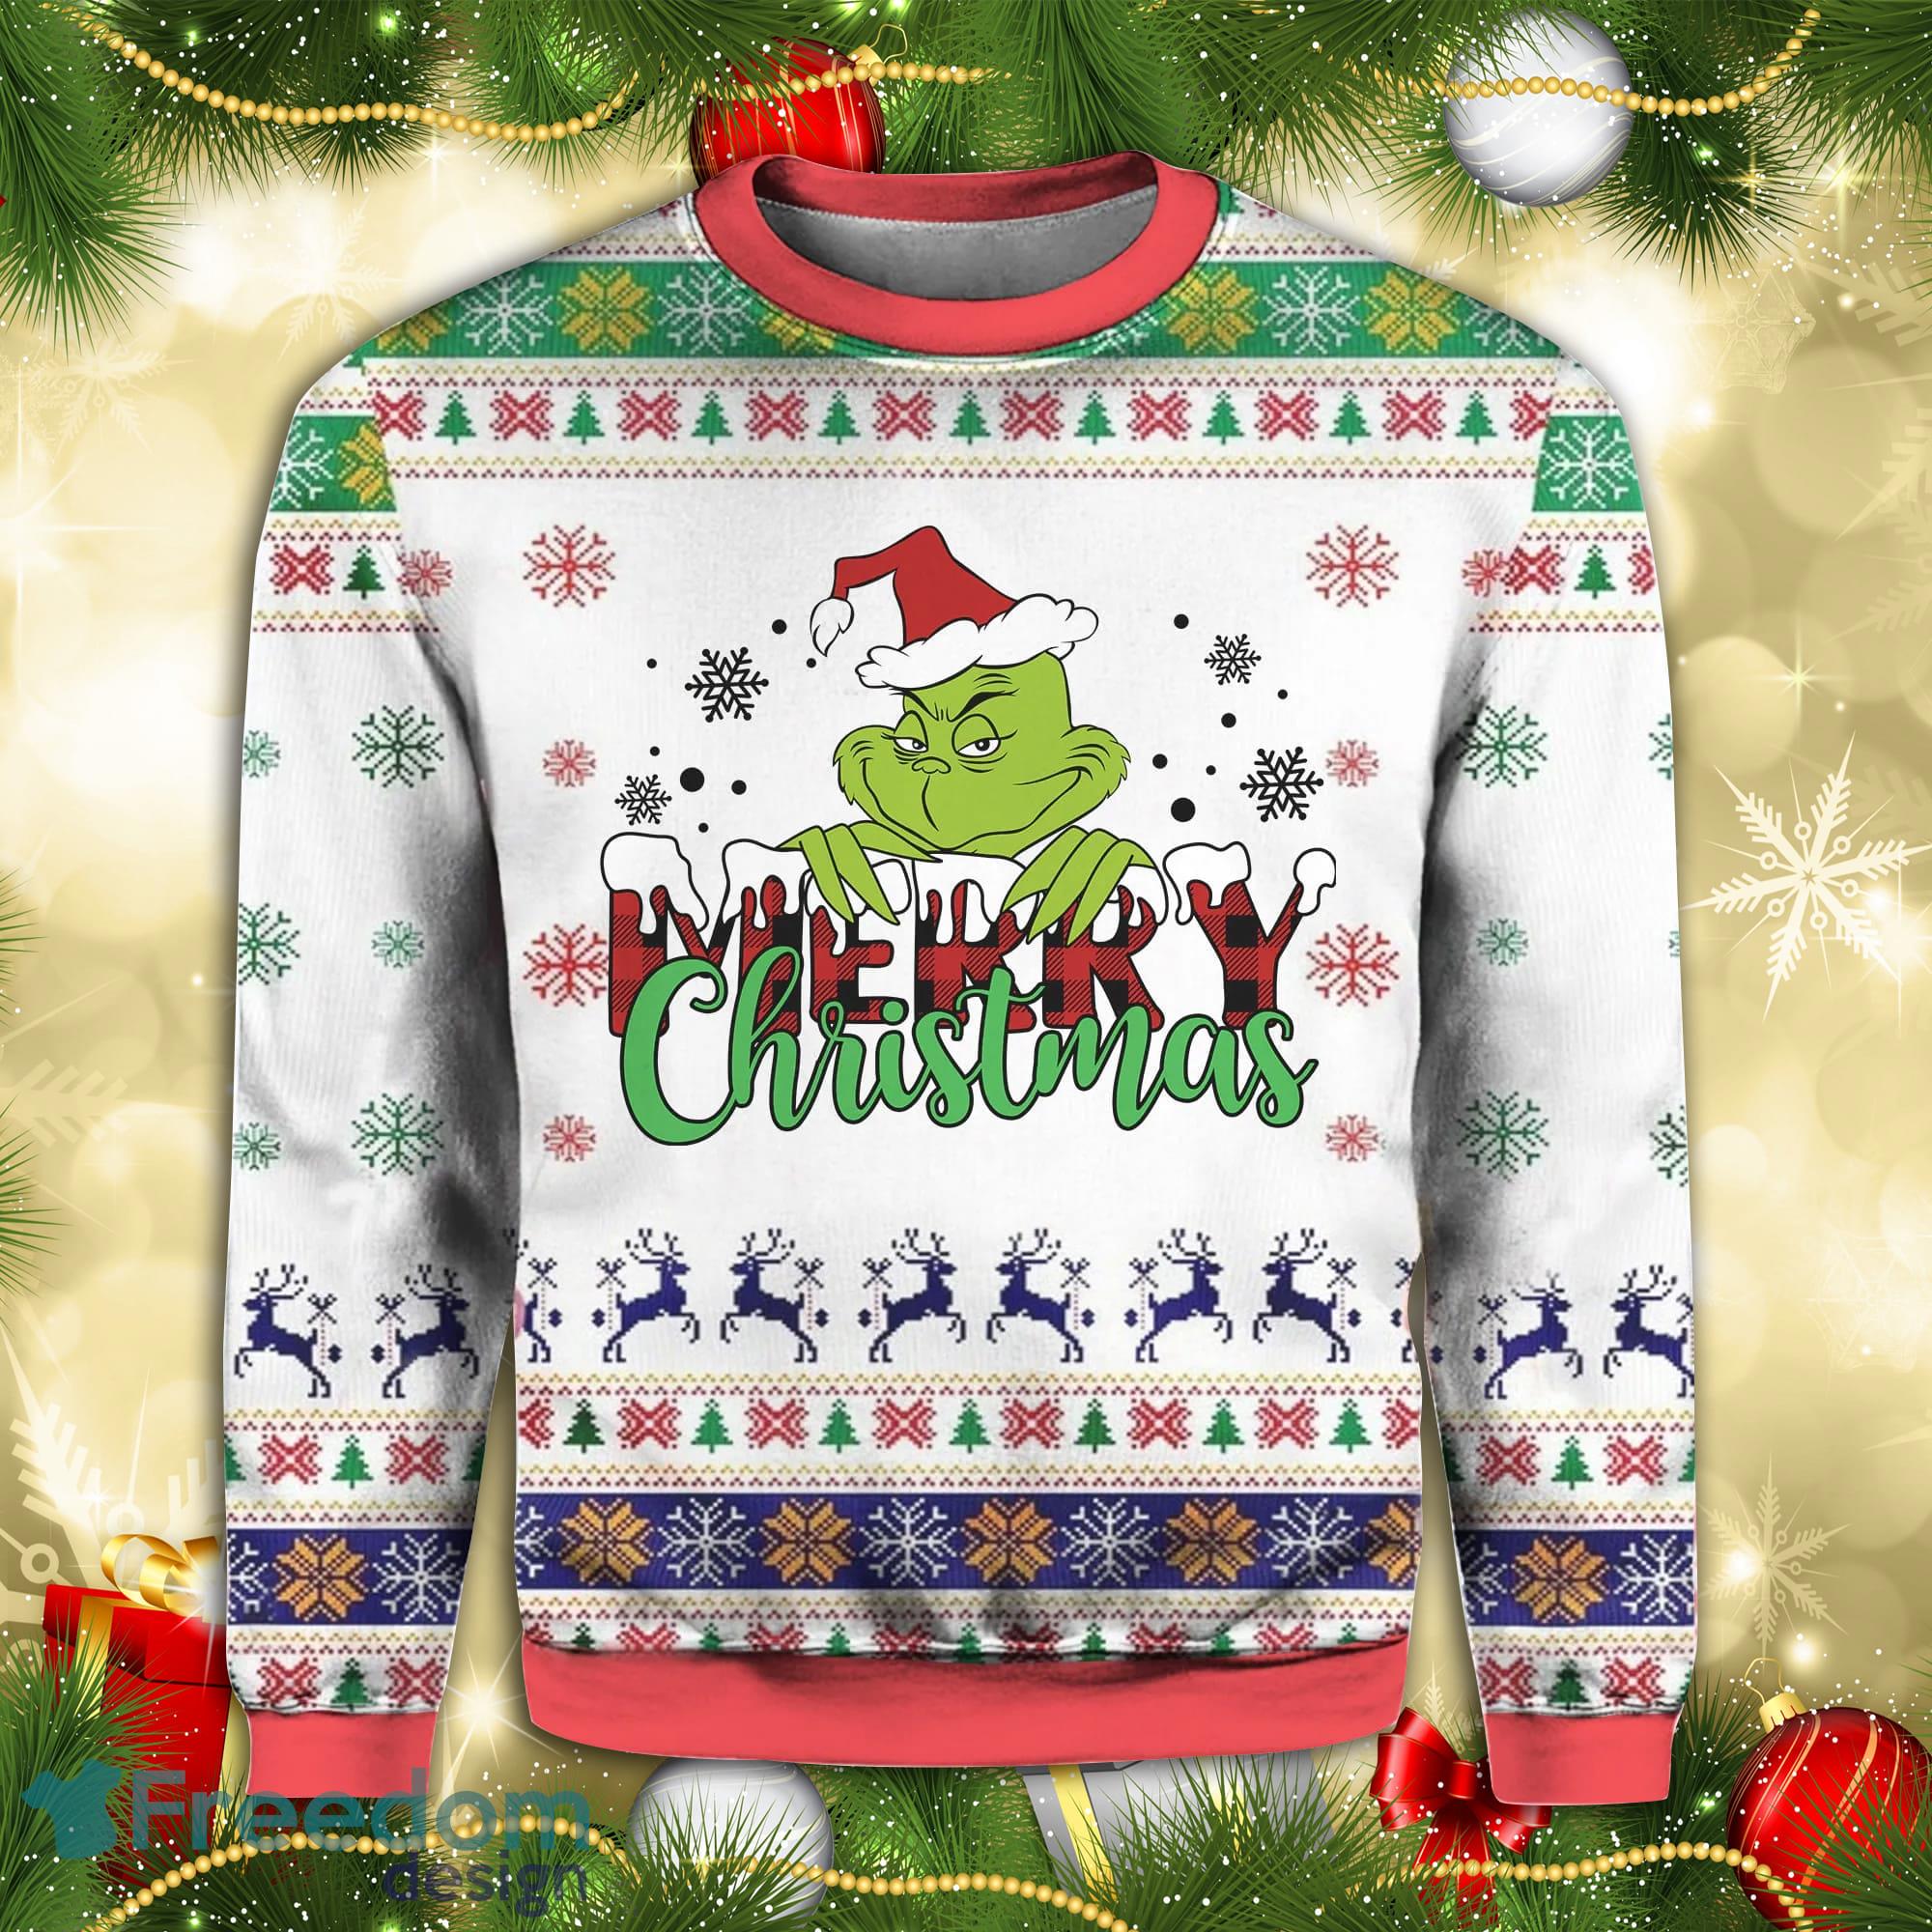 Grinch Merry Christmas Knitted Ugly Christmas Sweater - YesItCustom